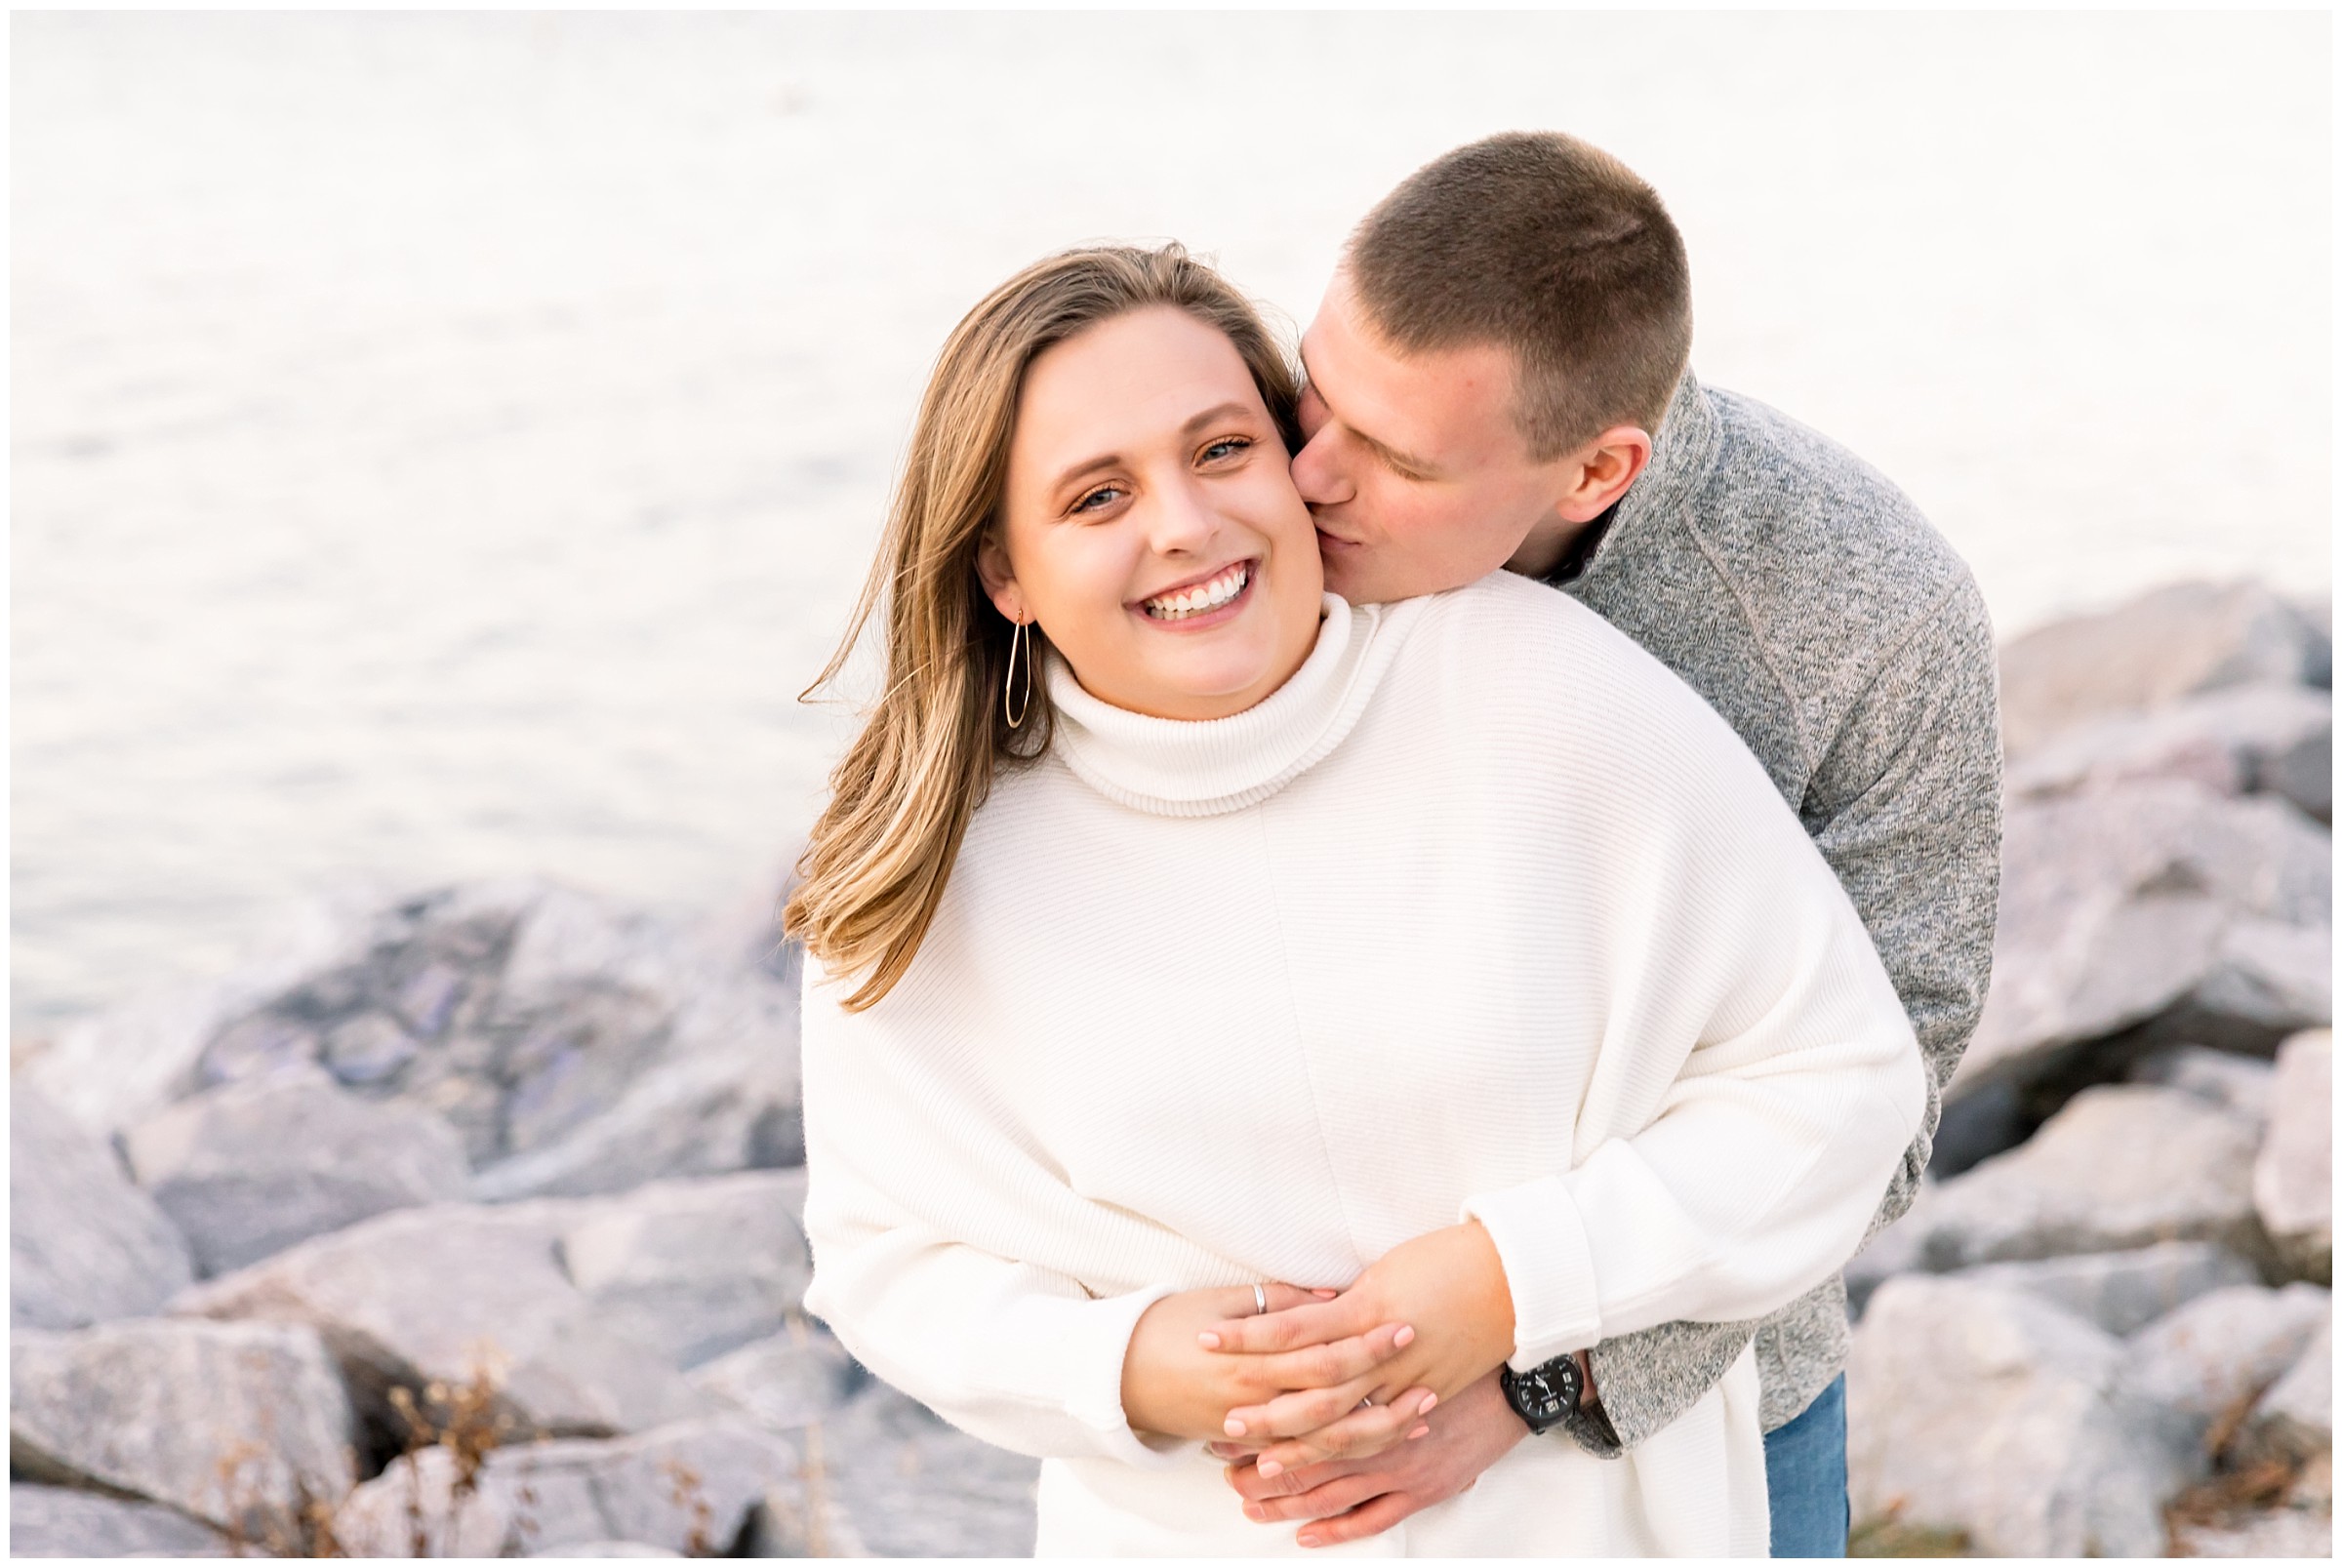 South shore Park engagement photo in Milwaukee